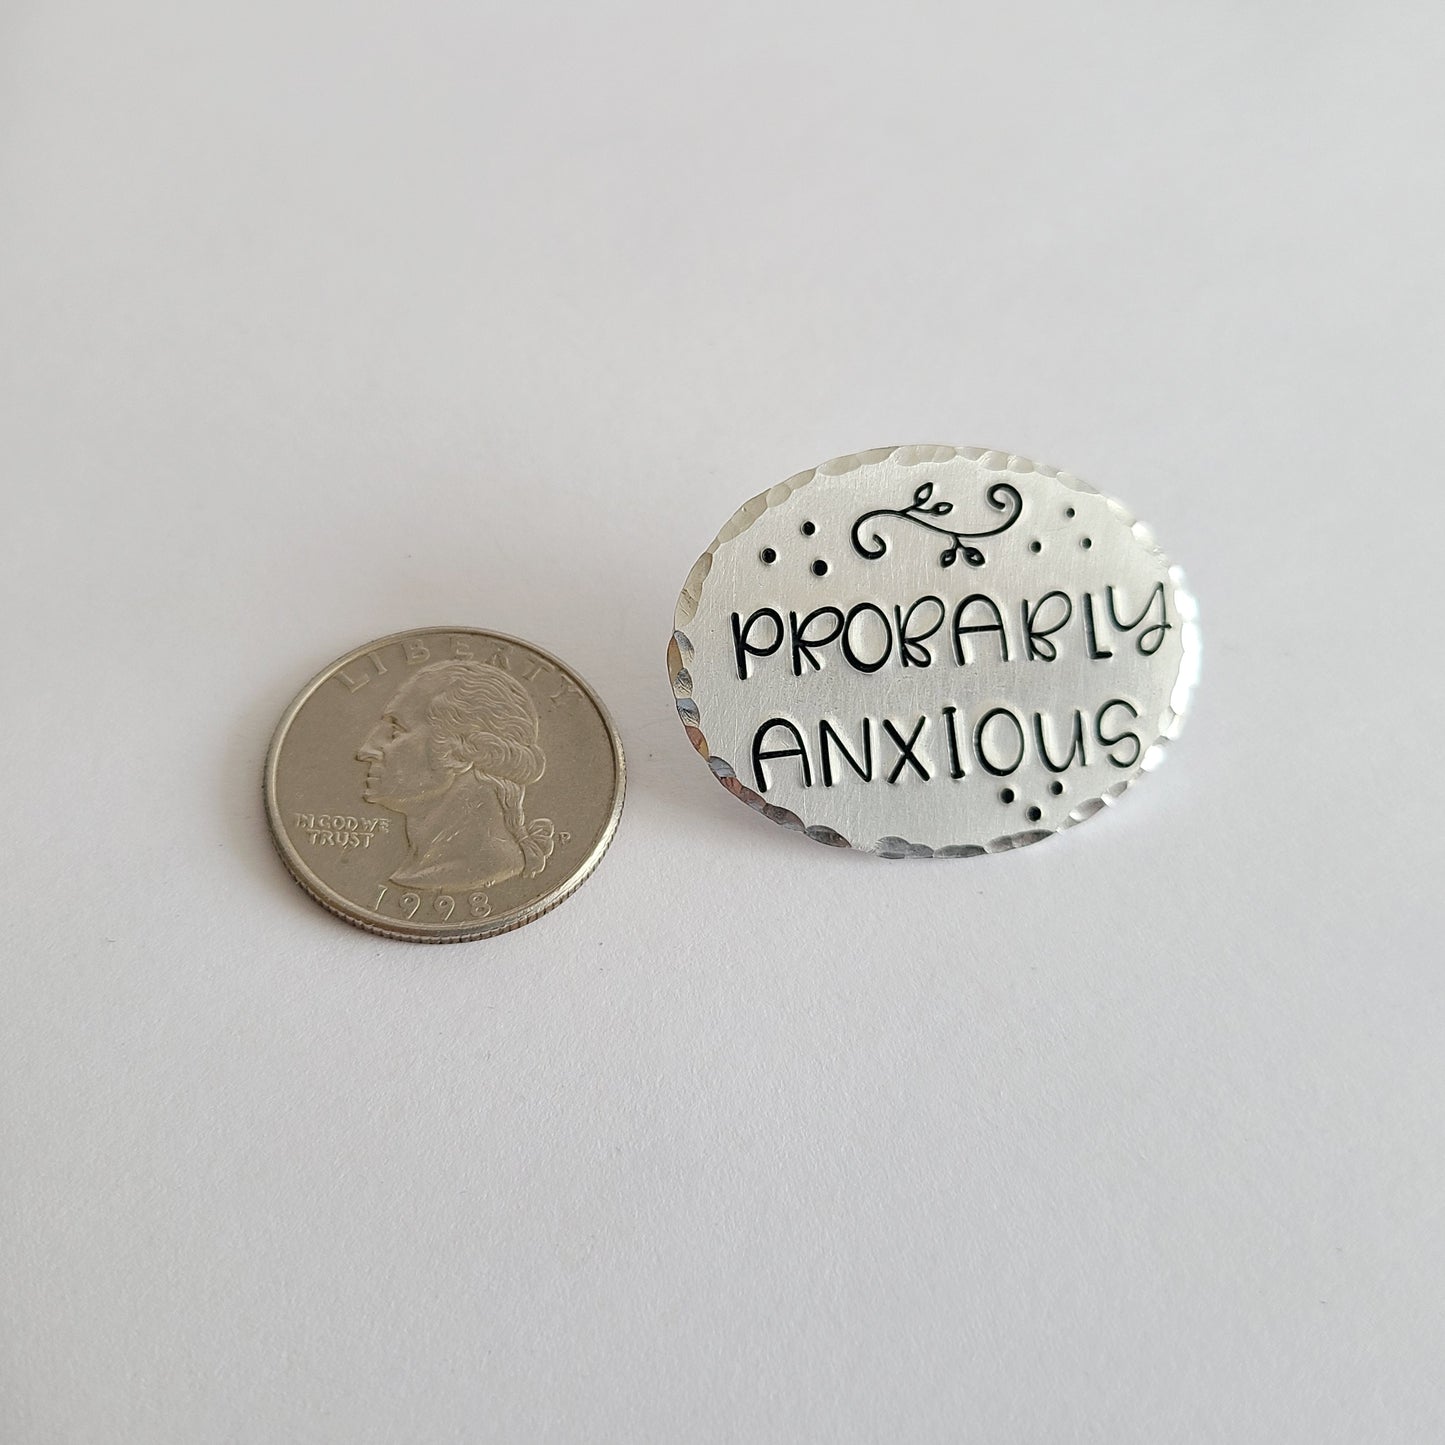 Probably Anxious Pin, Funny Gift for Women, Jean Jacket Accessories, Pins for Backpacks